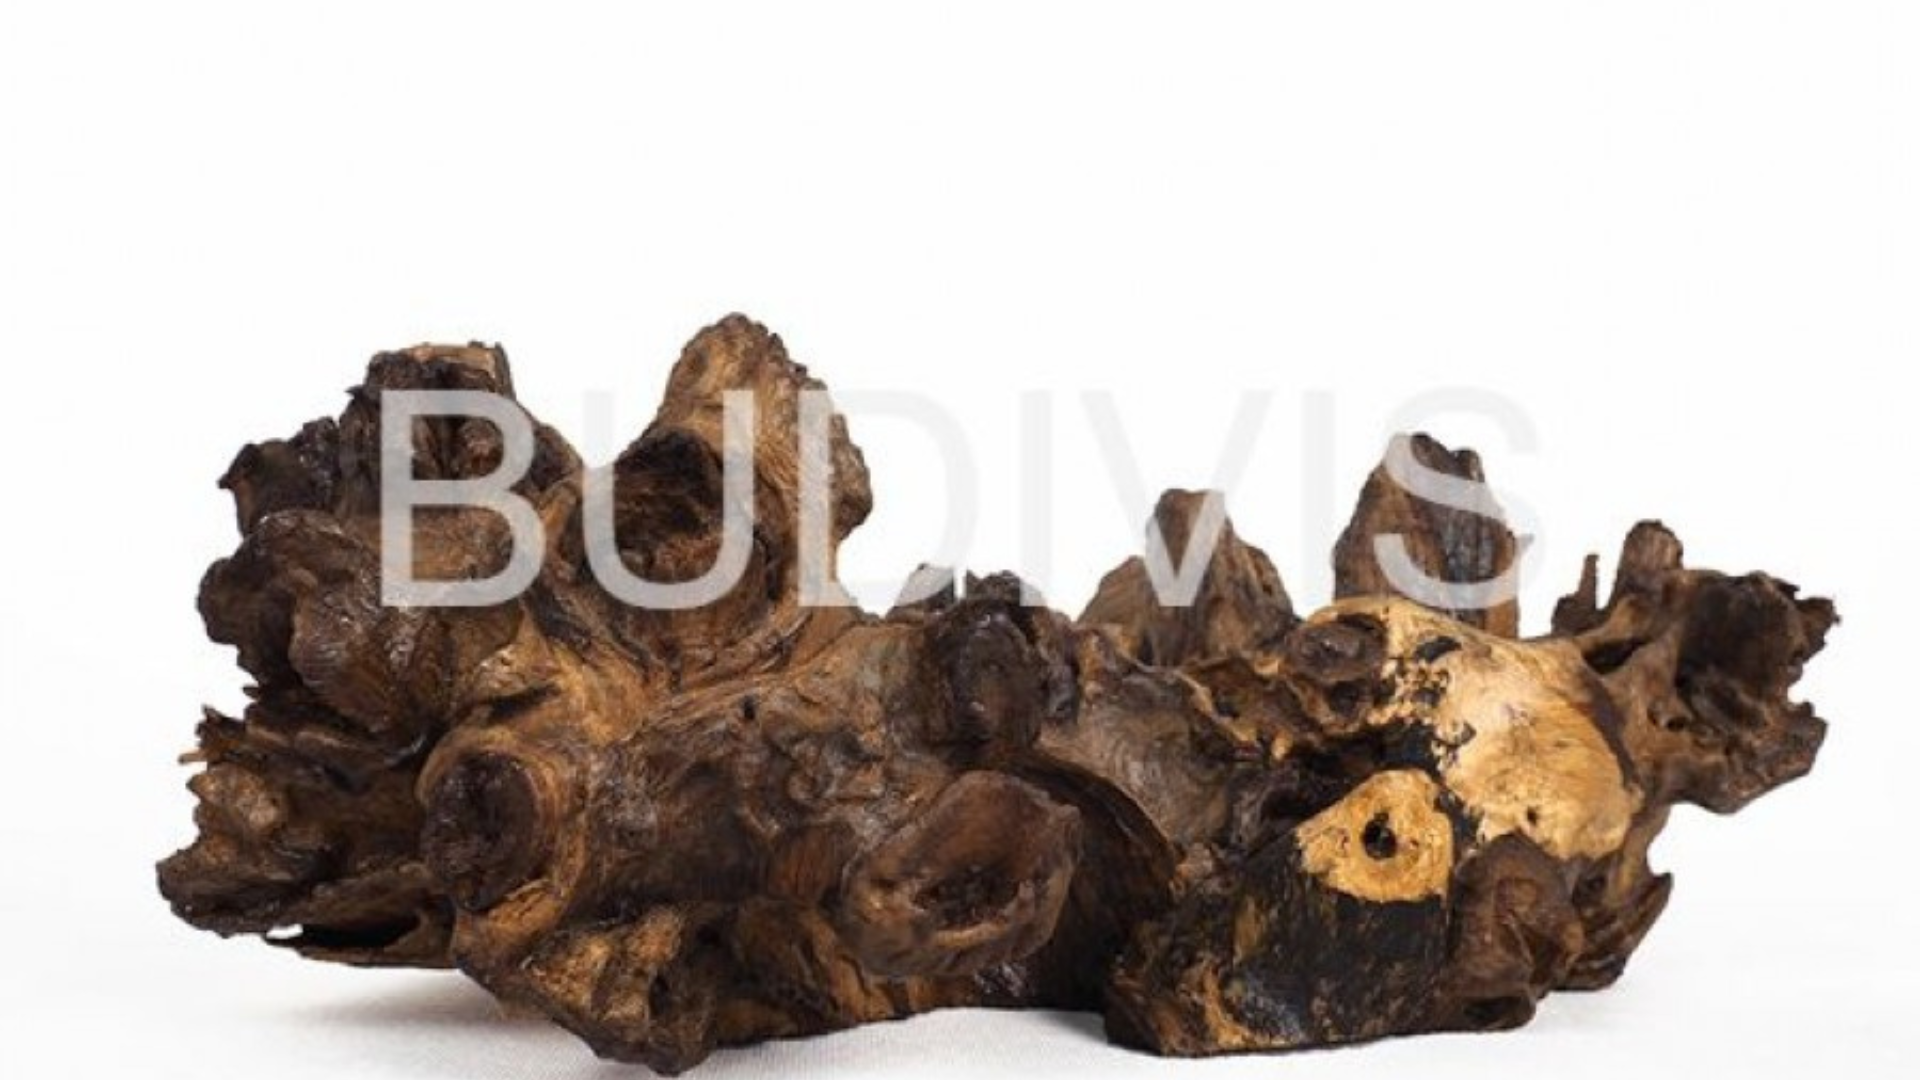 https://www.budivis.com/image/cache/catalog/A%20Blog/A%20blog%20pic/new/Driftwood-1920x1080.png